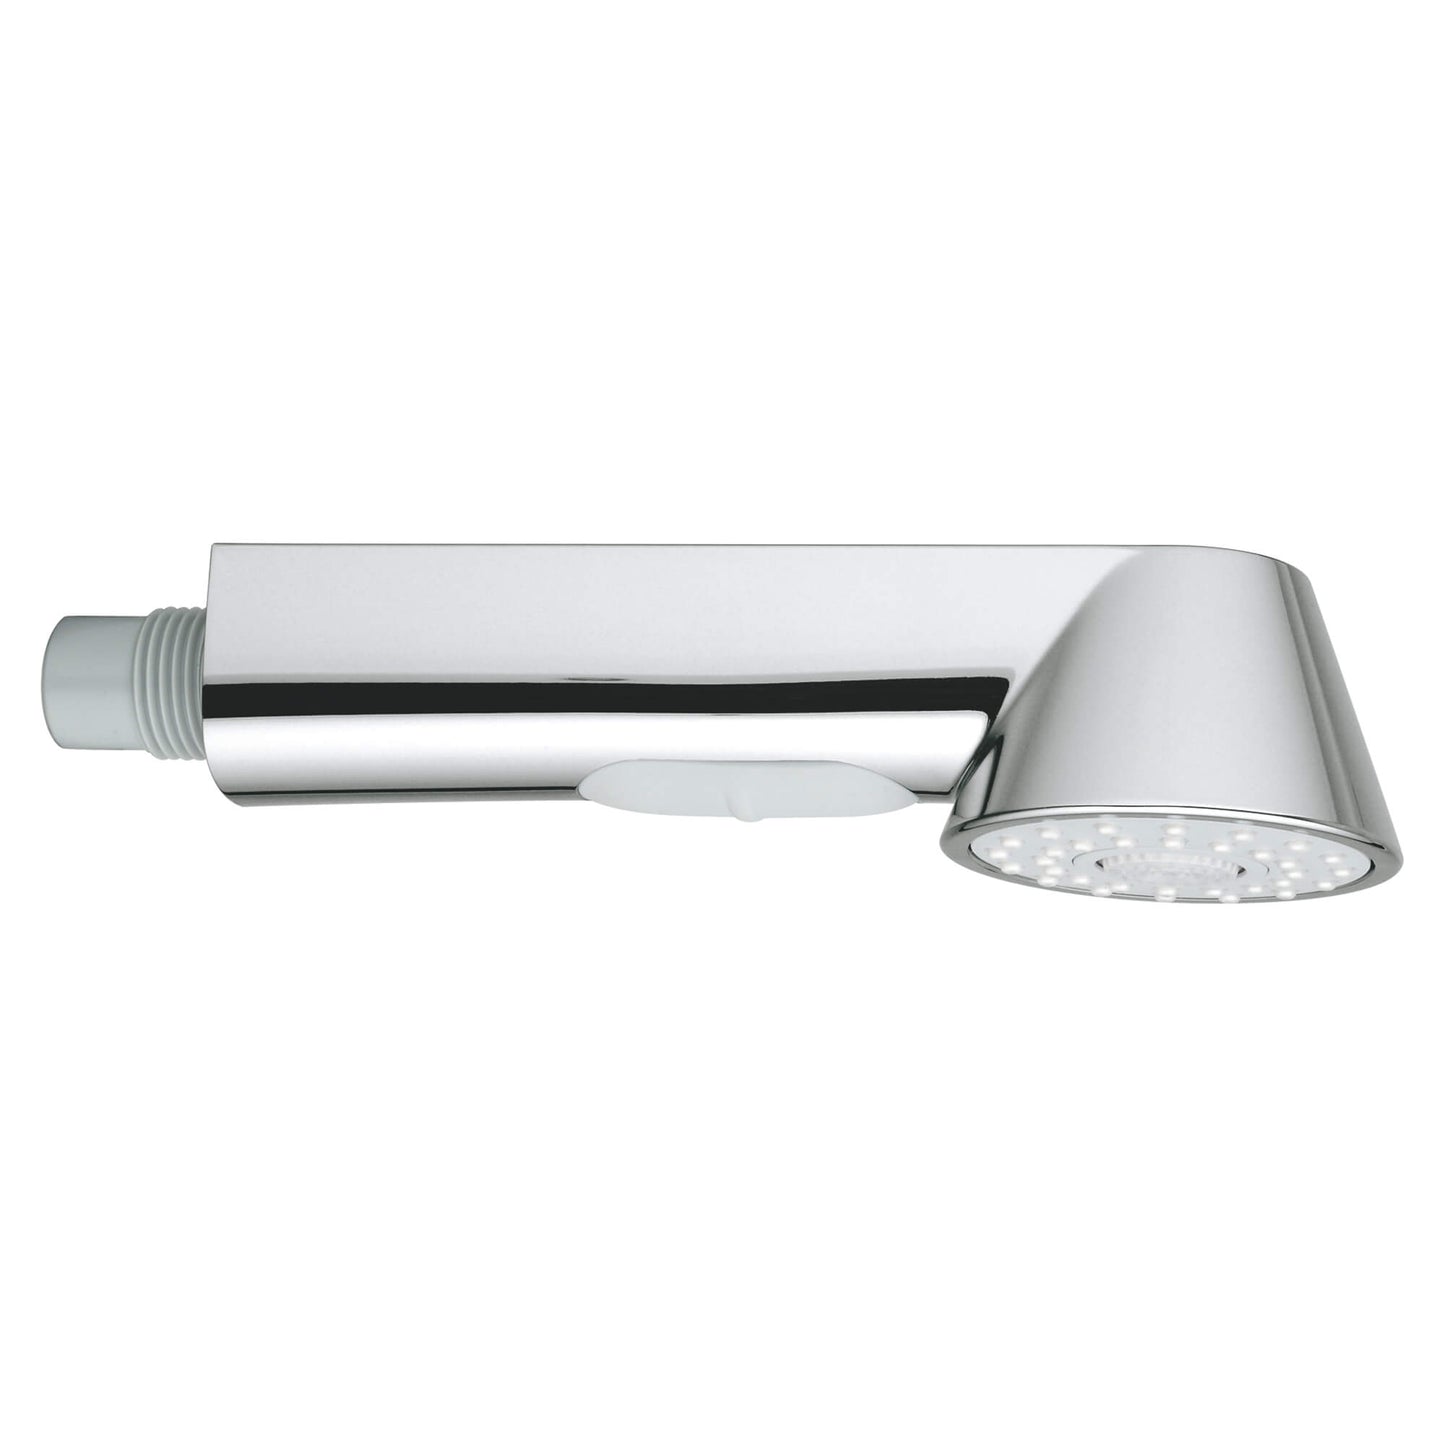 GROHE 64156000 Universal Chrome Pull-Out Spray